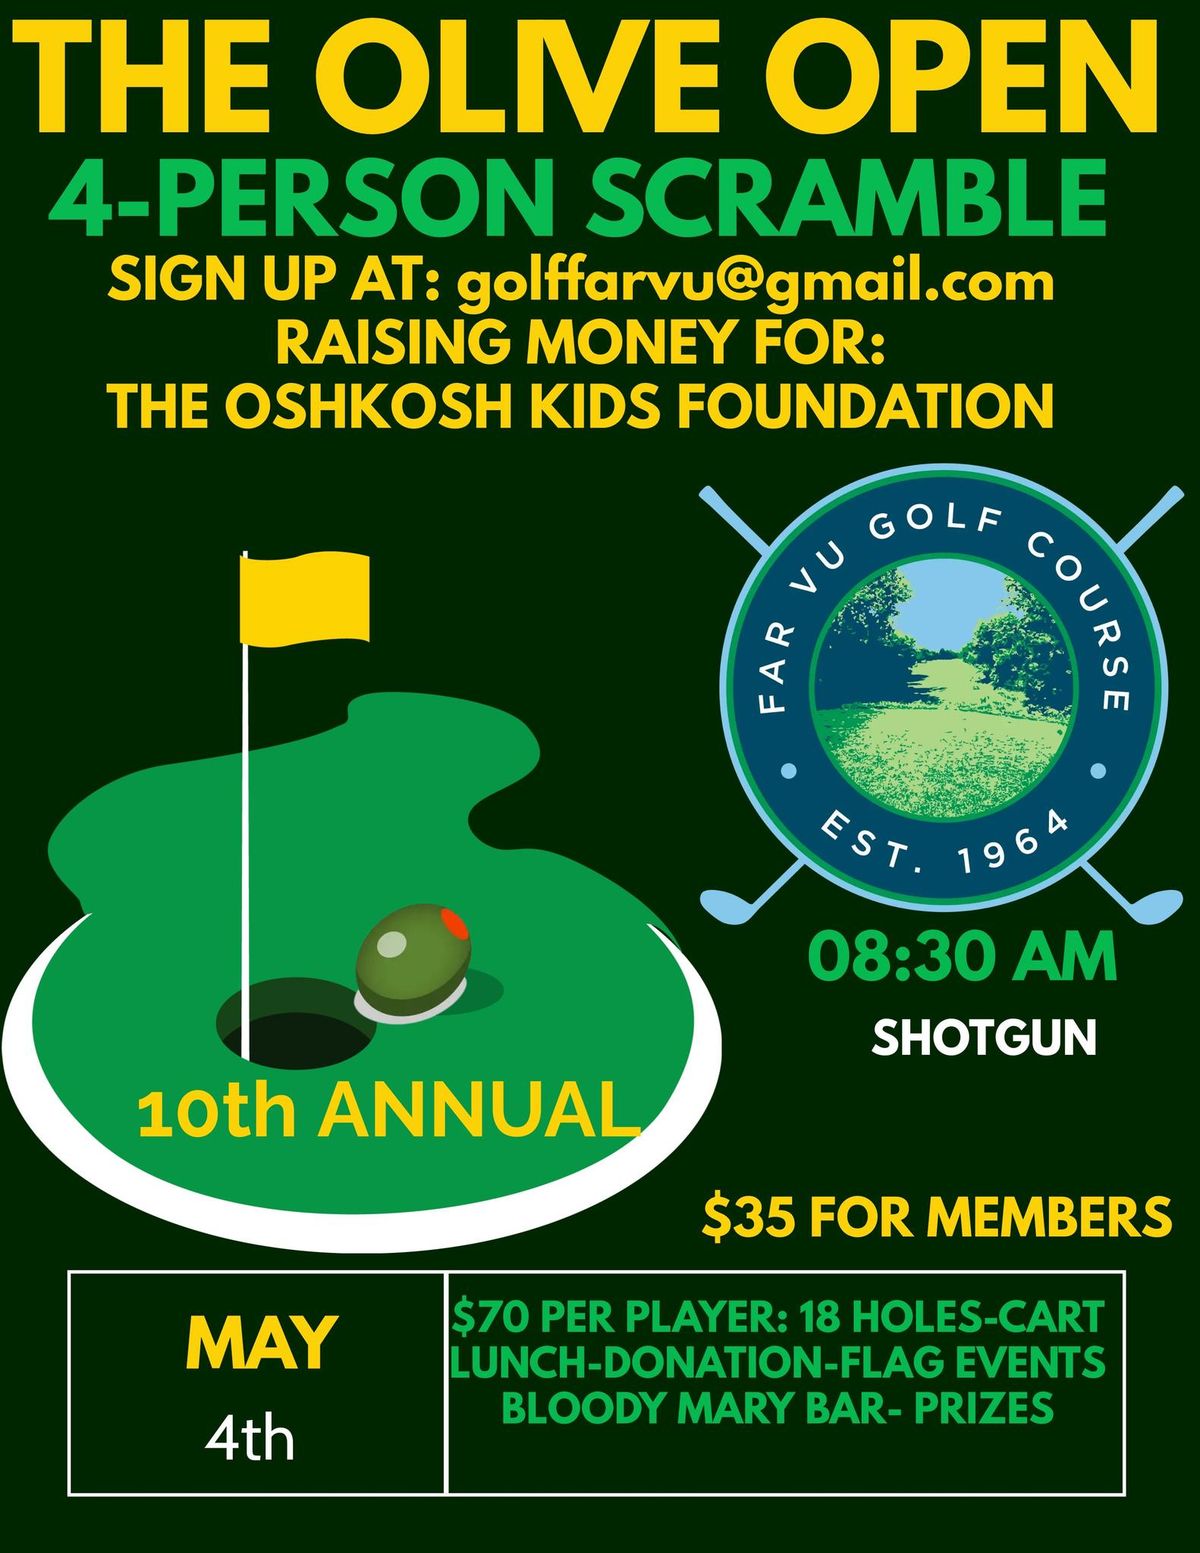 10th Annual Olive Open